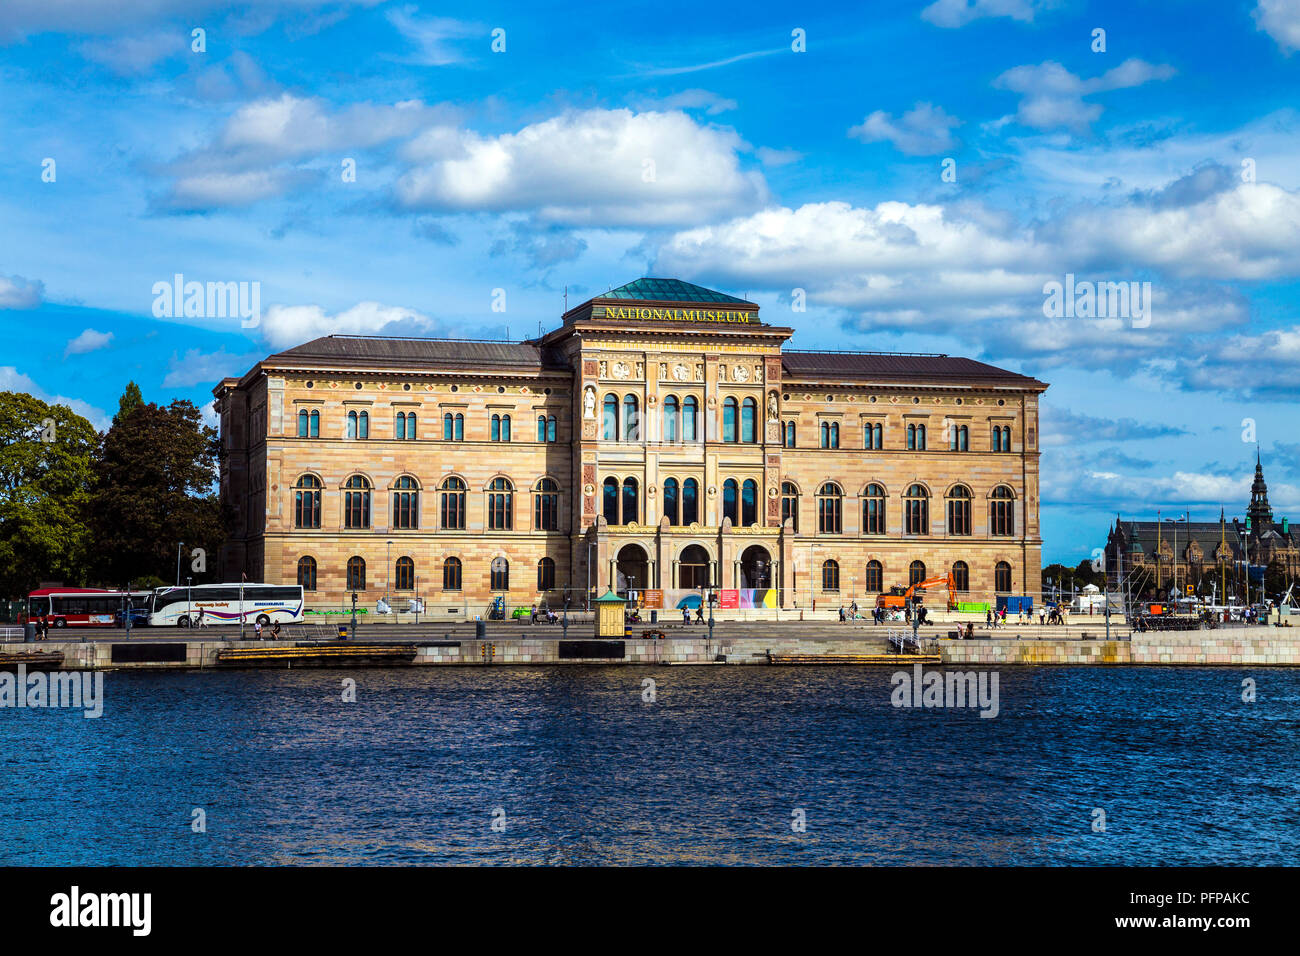 Building exterior of the Nation Museum (Nationalmuseum) in Stockholm, Swede Stock Photo